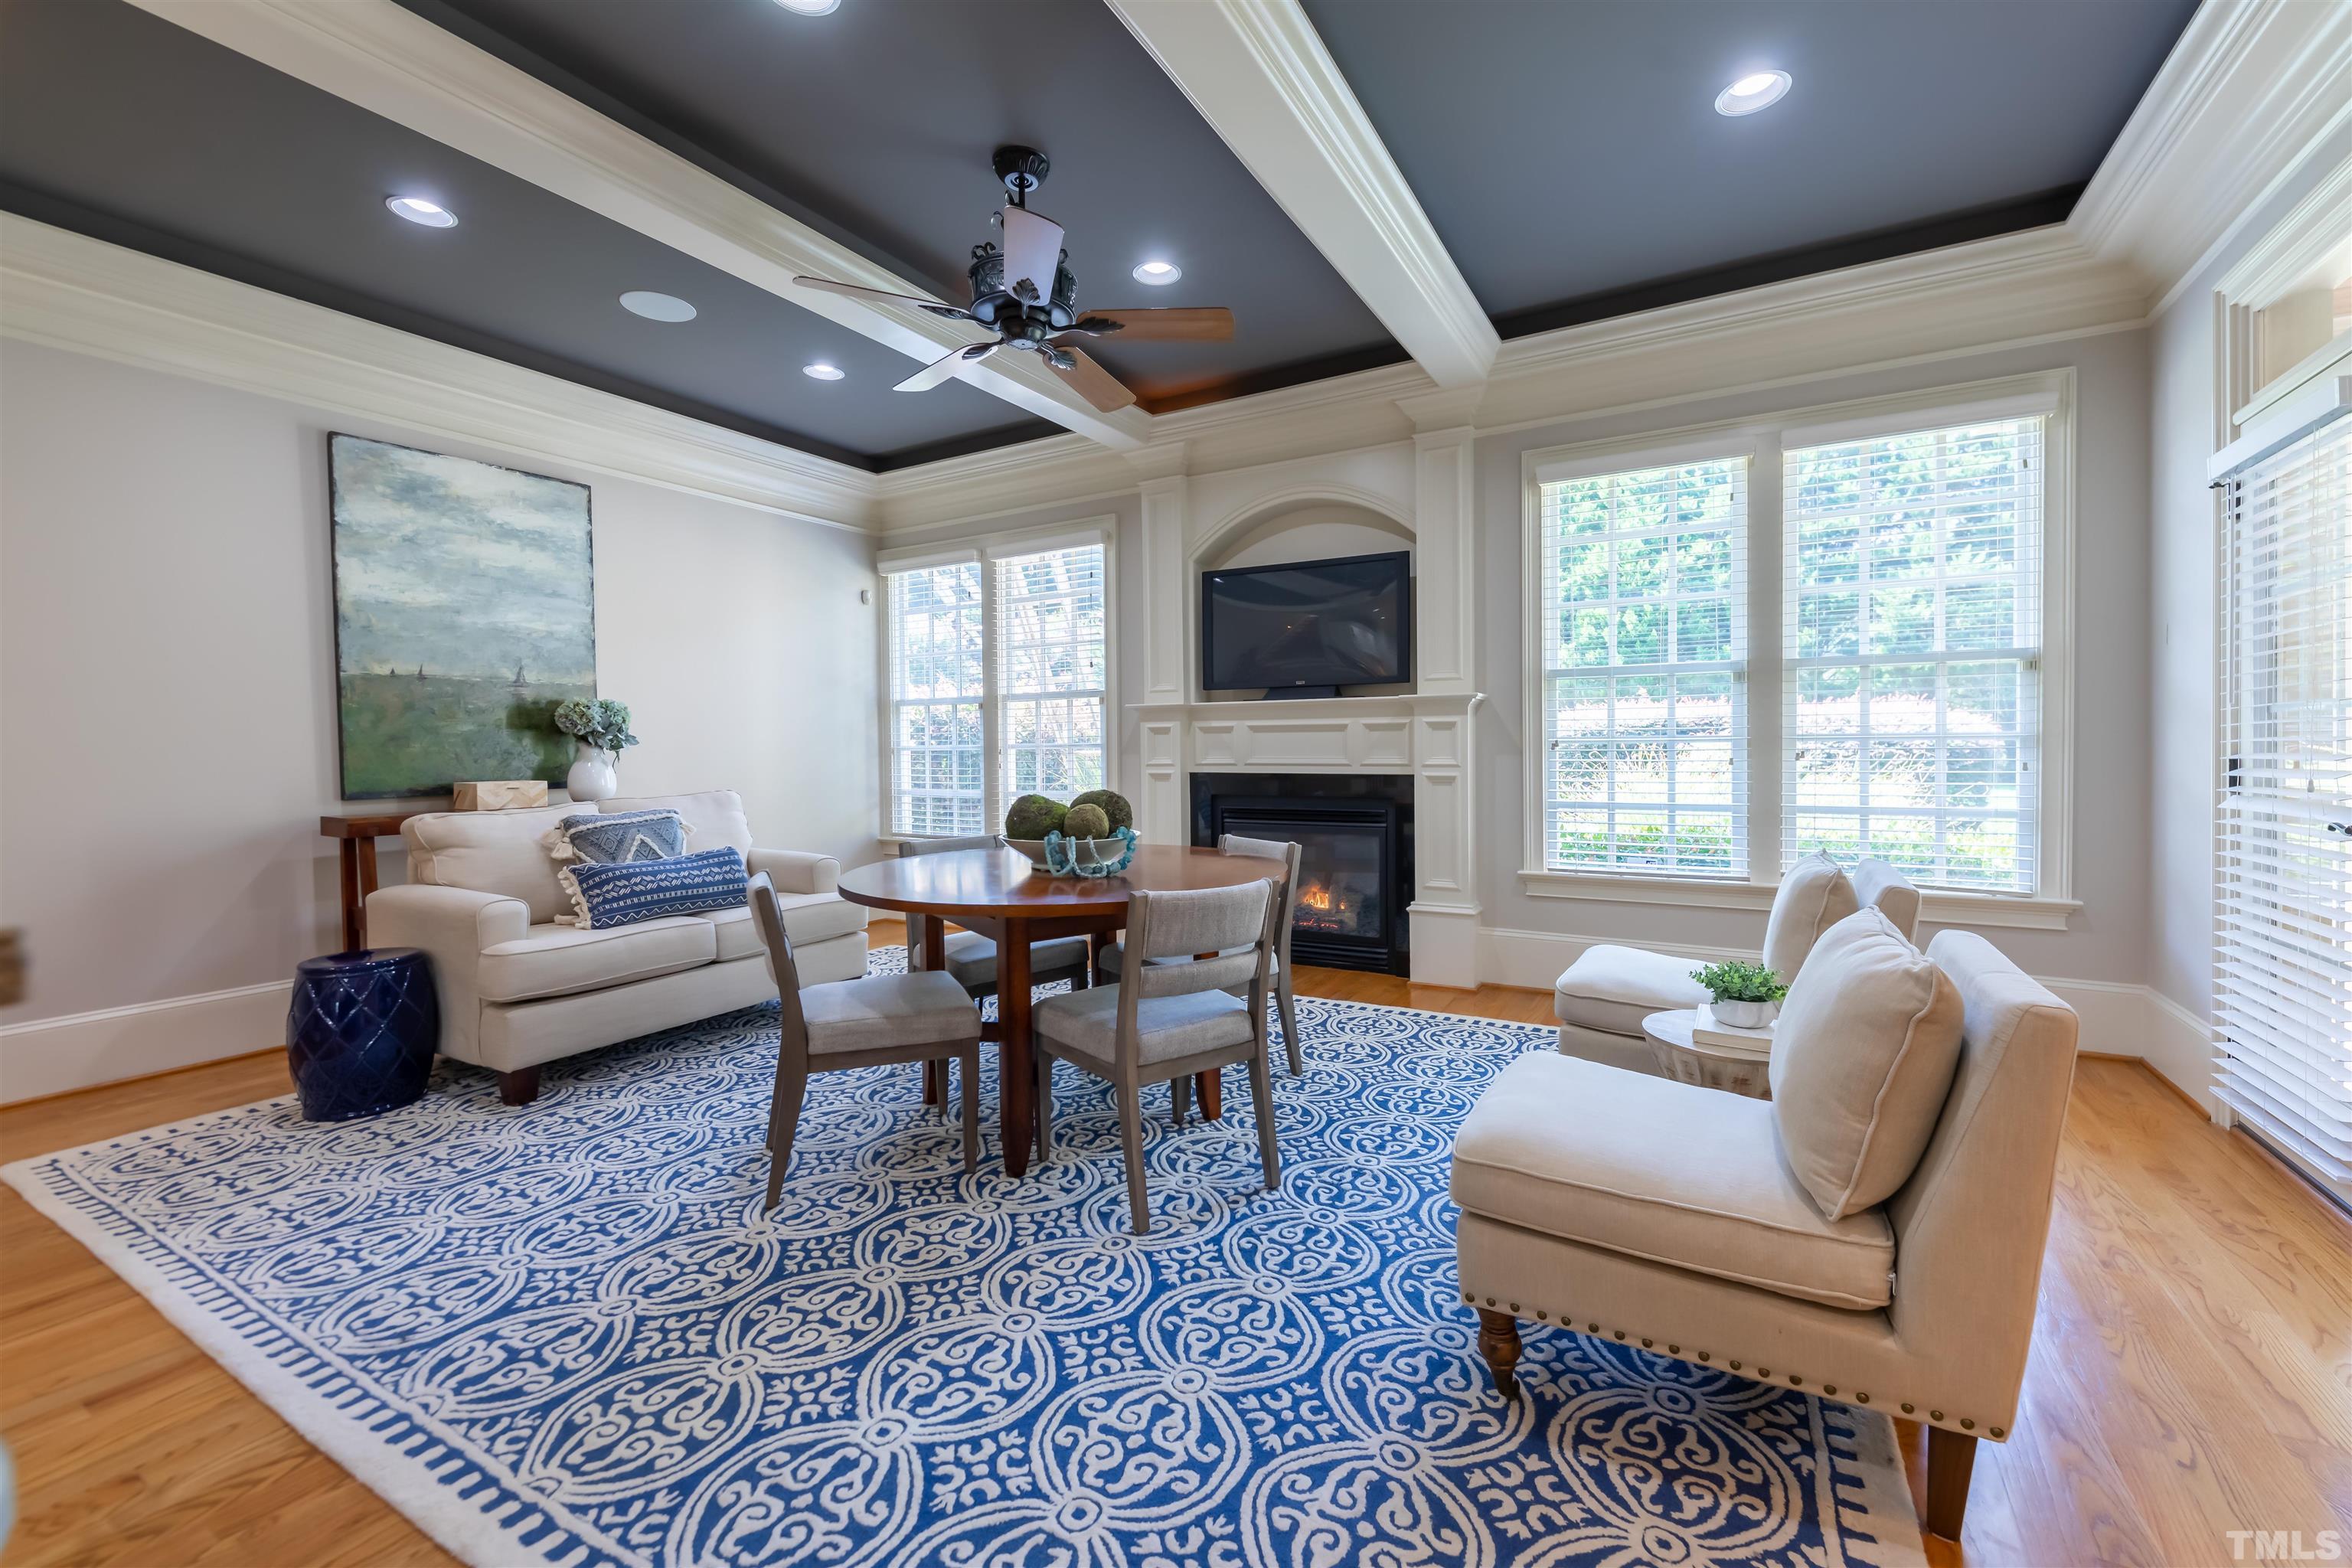 There are so many ways to use this space...a breakfast room, keeping room or a combination.  The beamed ceiling also has up-lighting as well as recessed.  There is room for a TV above the fireplace.  Gather and socialize with the cooks in the kitchen.